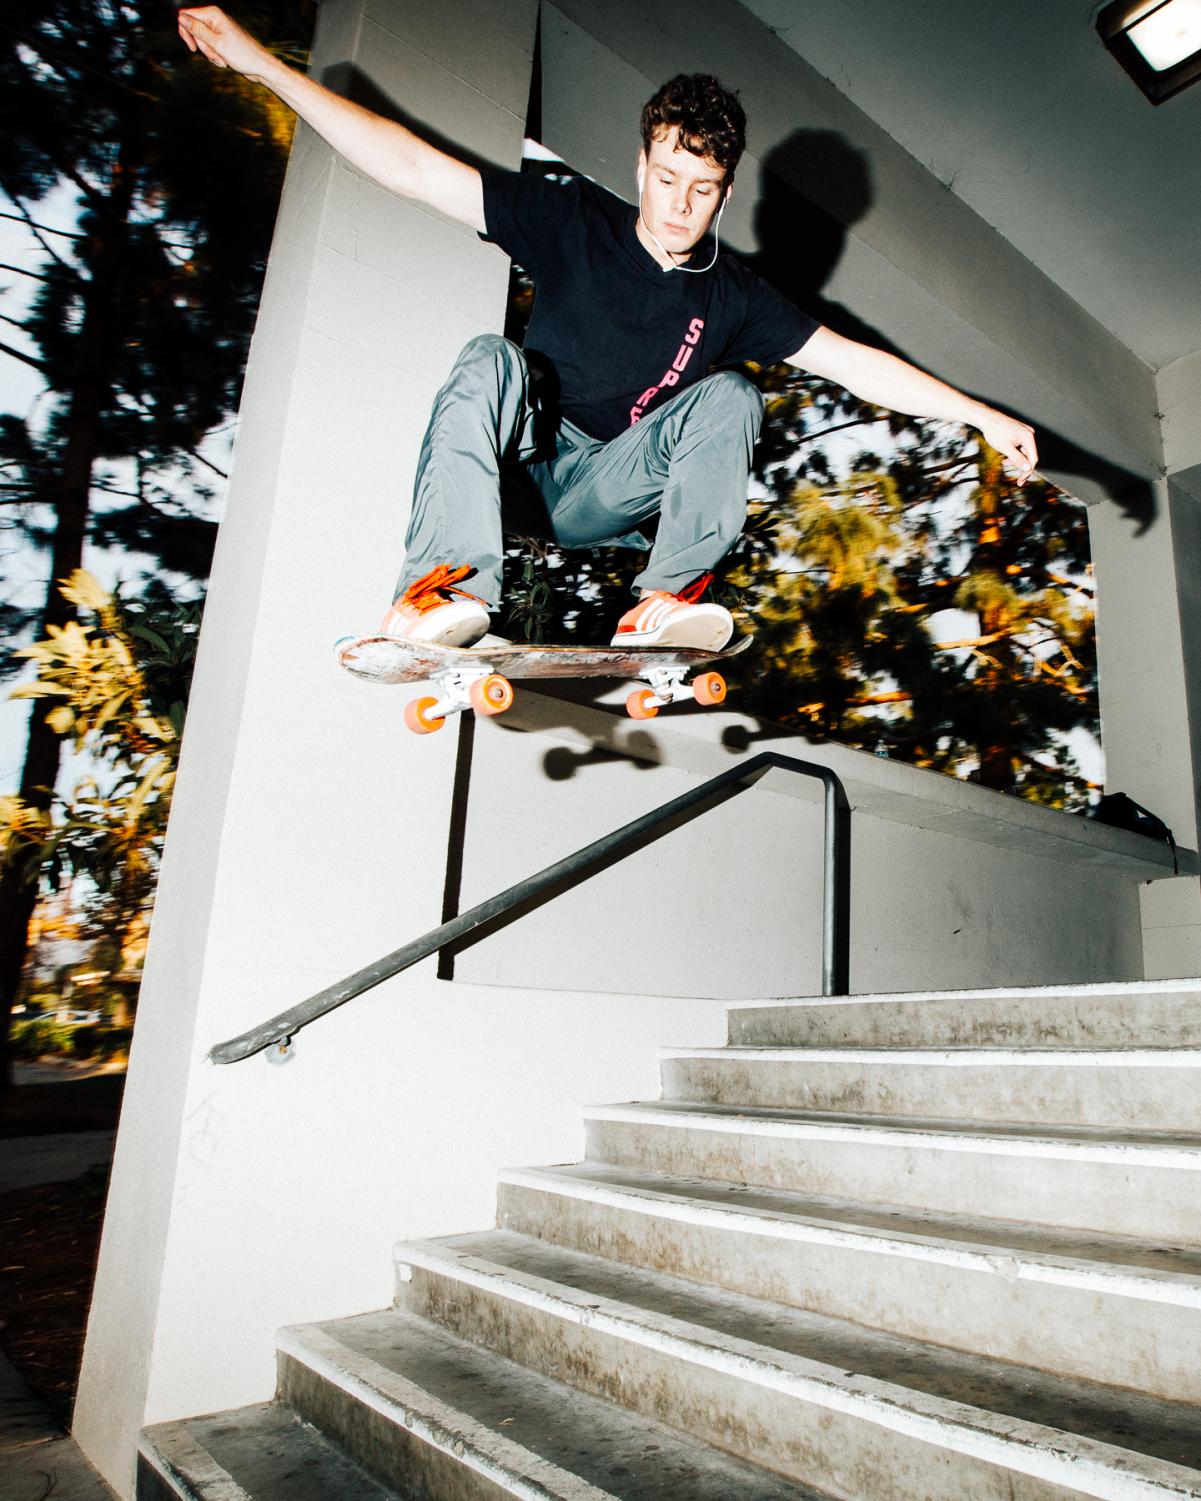  Economics Major and skater Dylan Osgood ollies seven stairs on Wednesday, Nov. 17, outside of the Administration Building’s east side face at City College in Santa Barbara, Calif. Osgood has been skating for 13 years. 